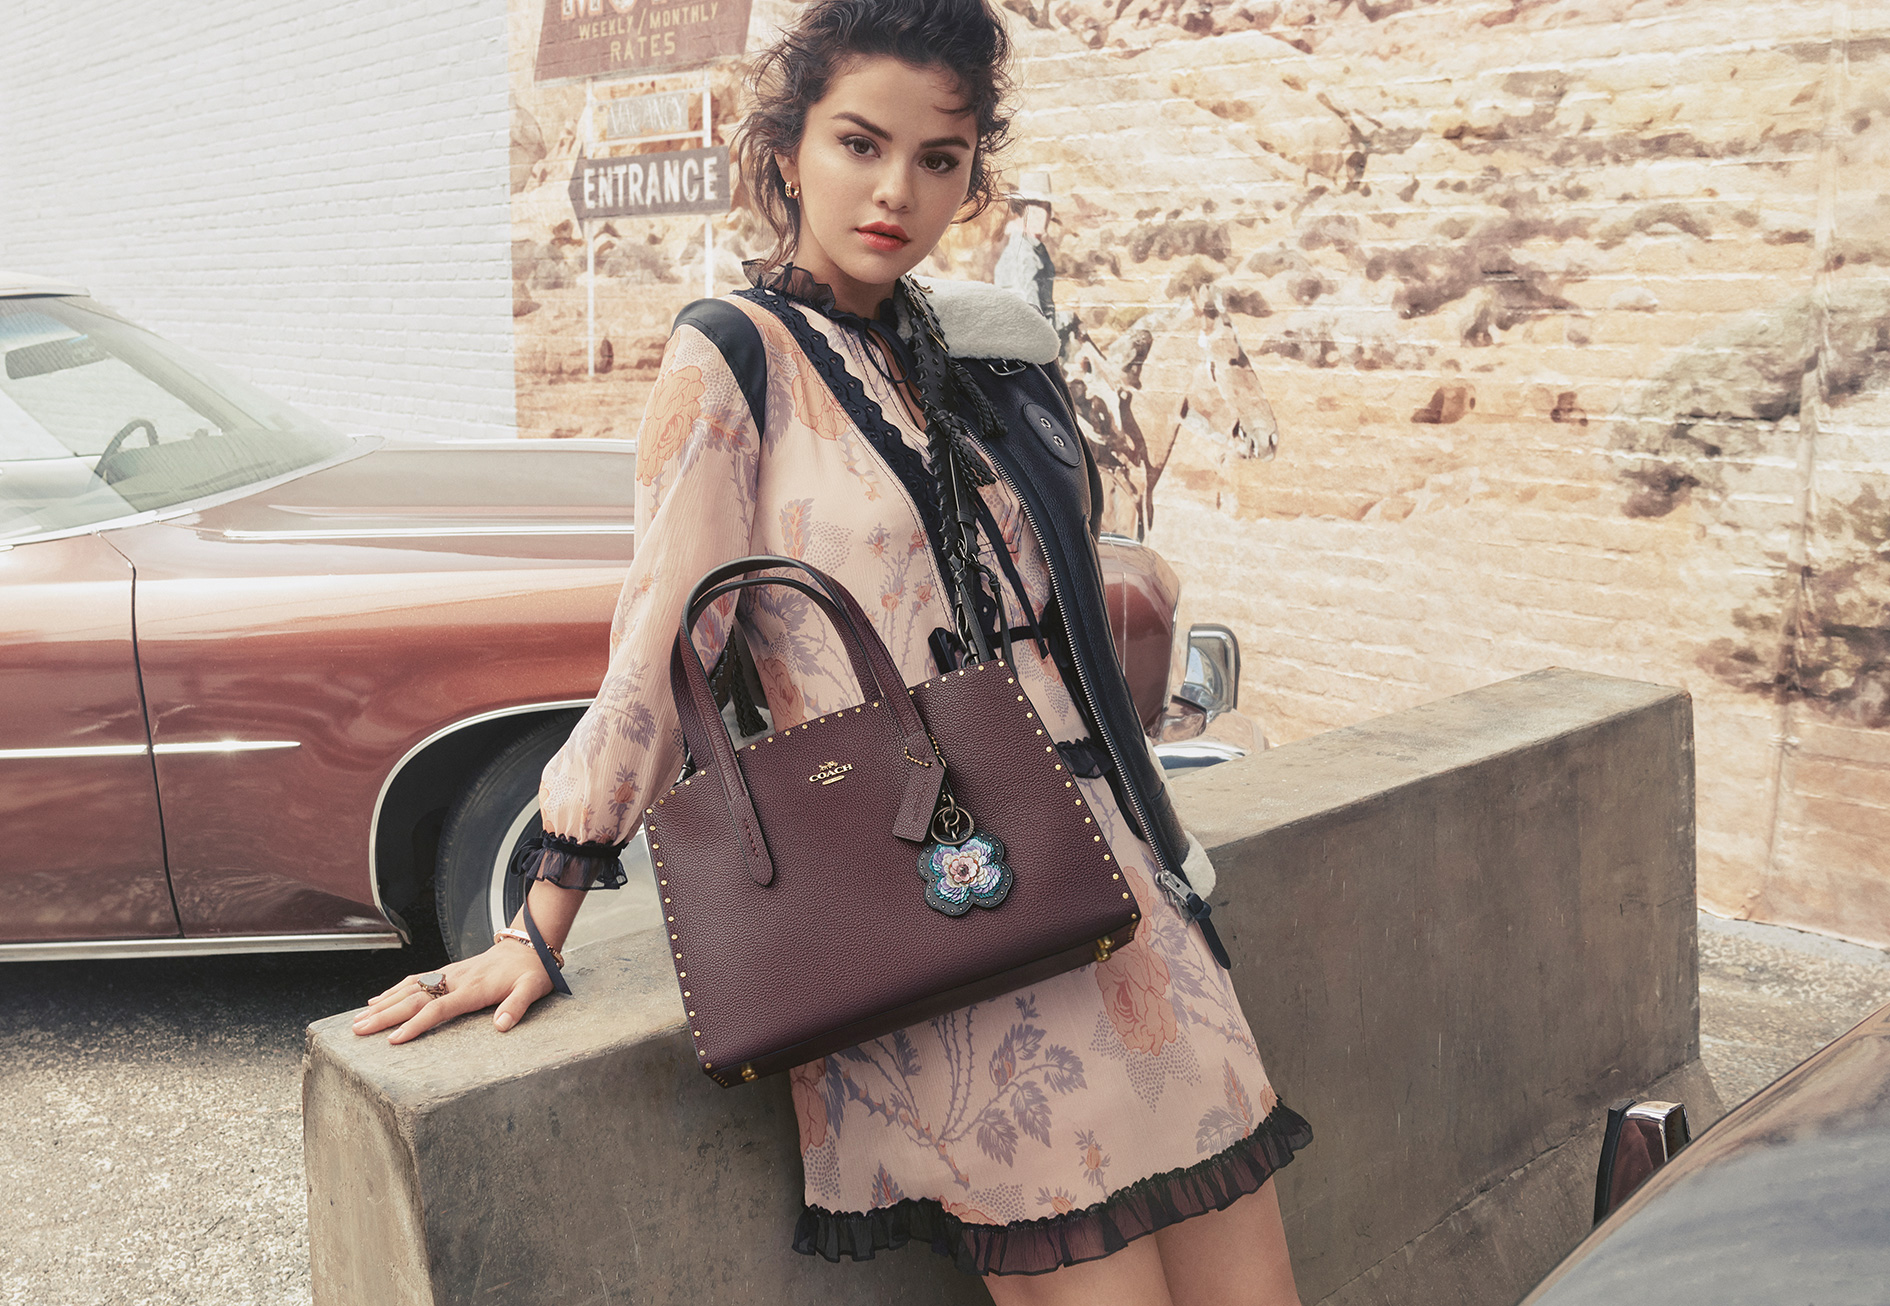 Wearing Coach SS18 Collection Like Selena Gomez